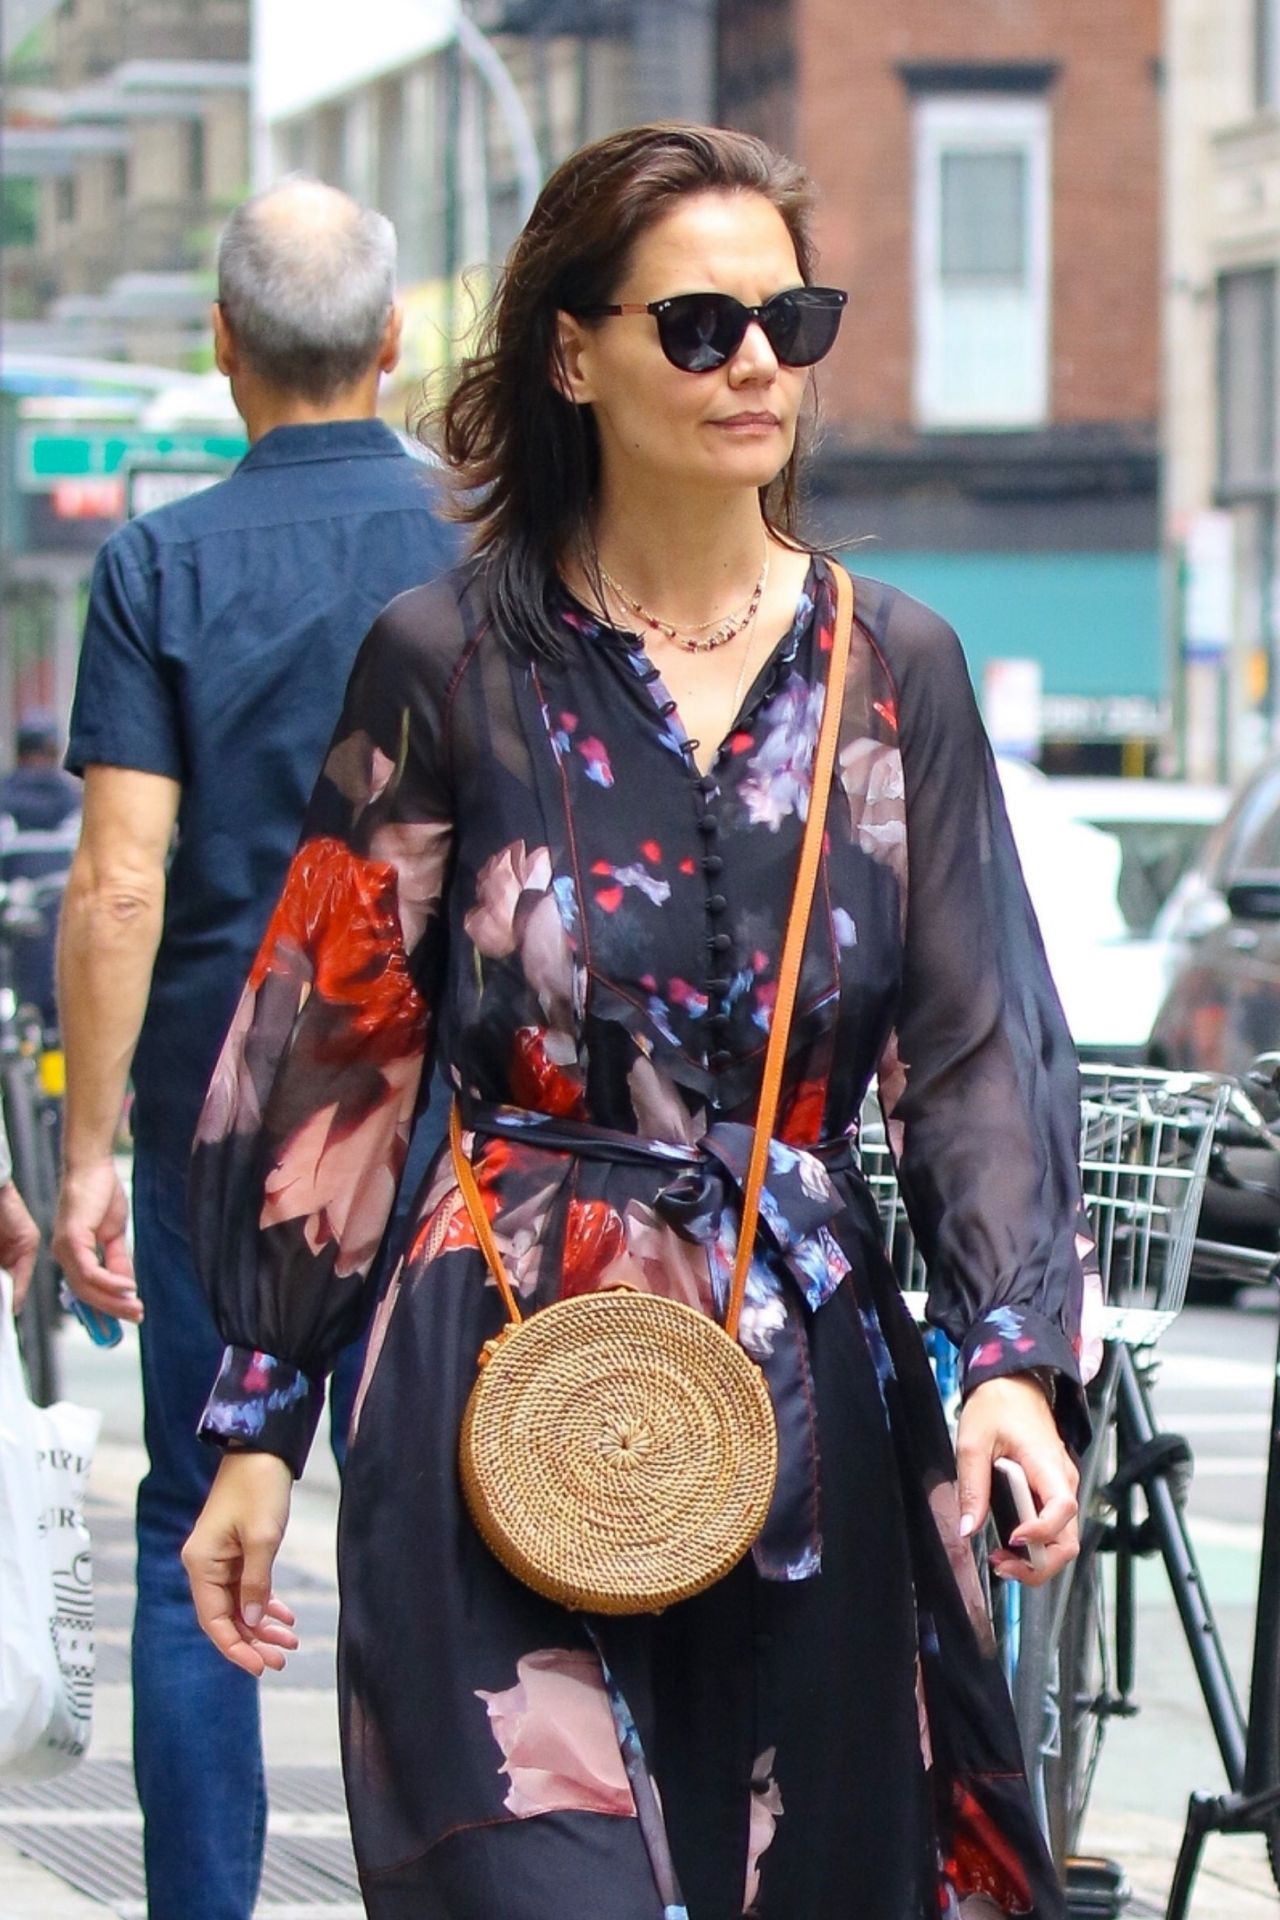 katie-holmes-out-in-nyc-5-28-2019-1.jpg